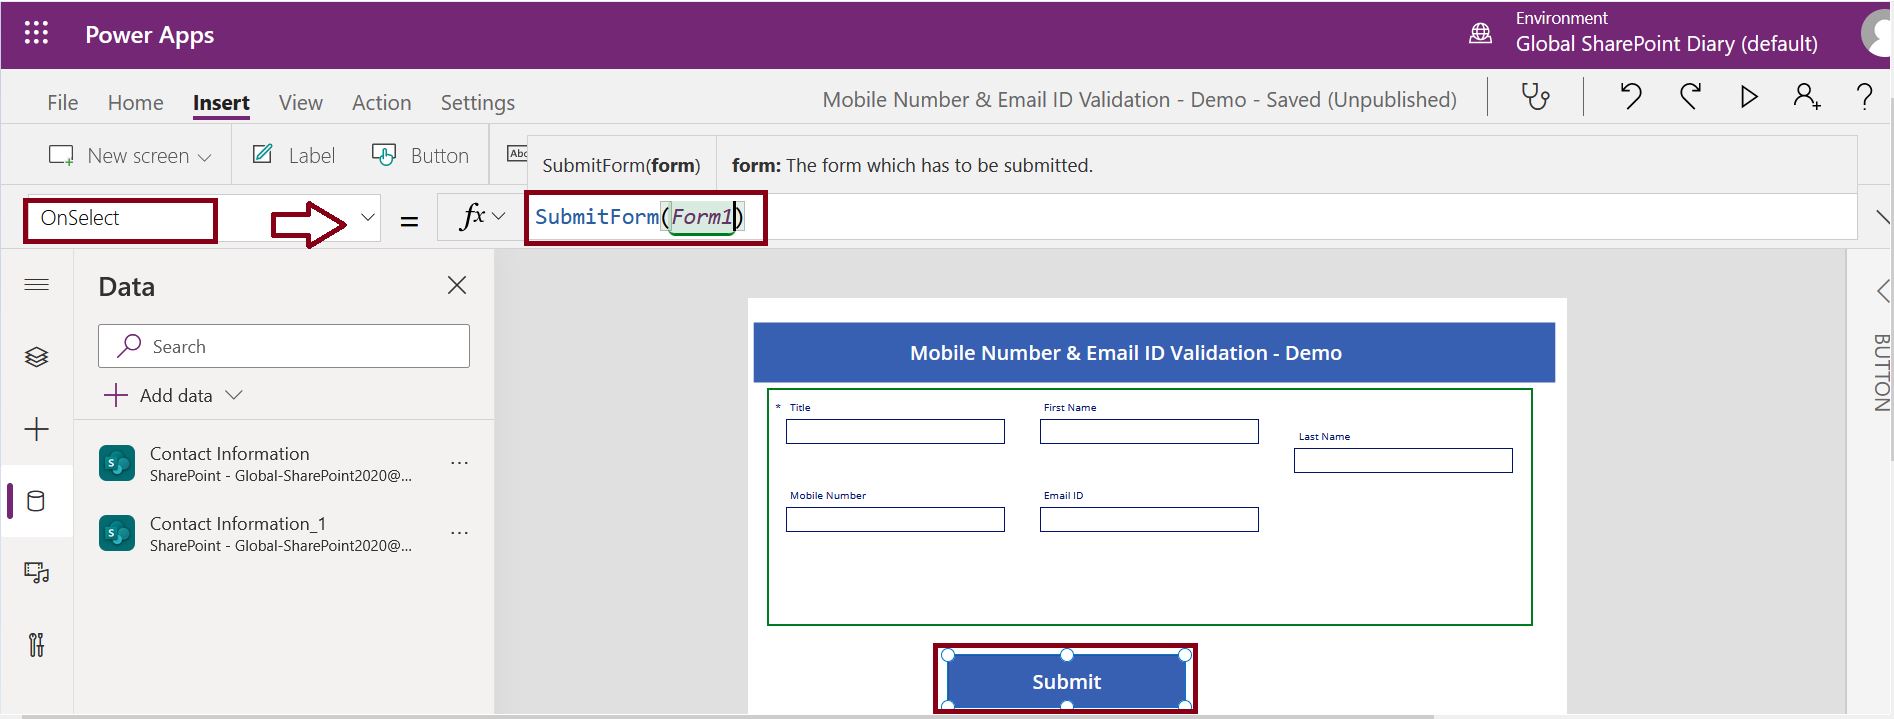 Submit form data to SharePoint Online list from PowerApps using the SubmitForm function